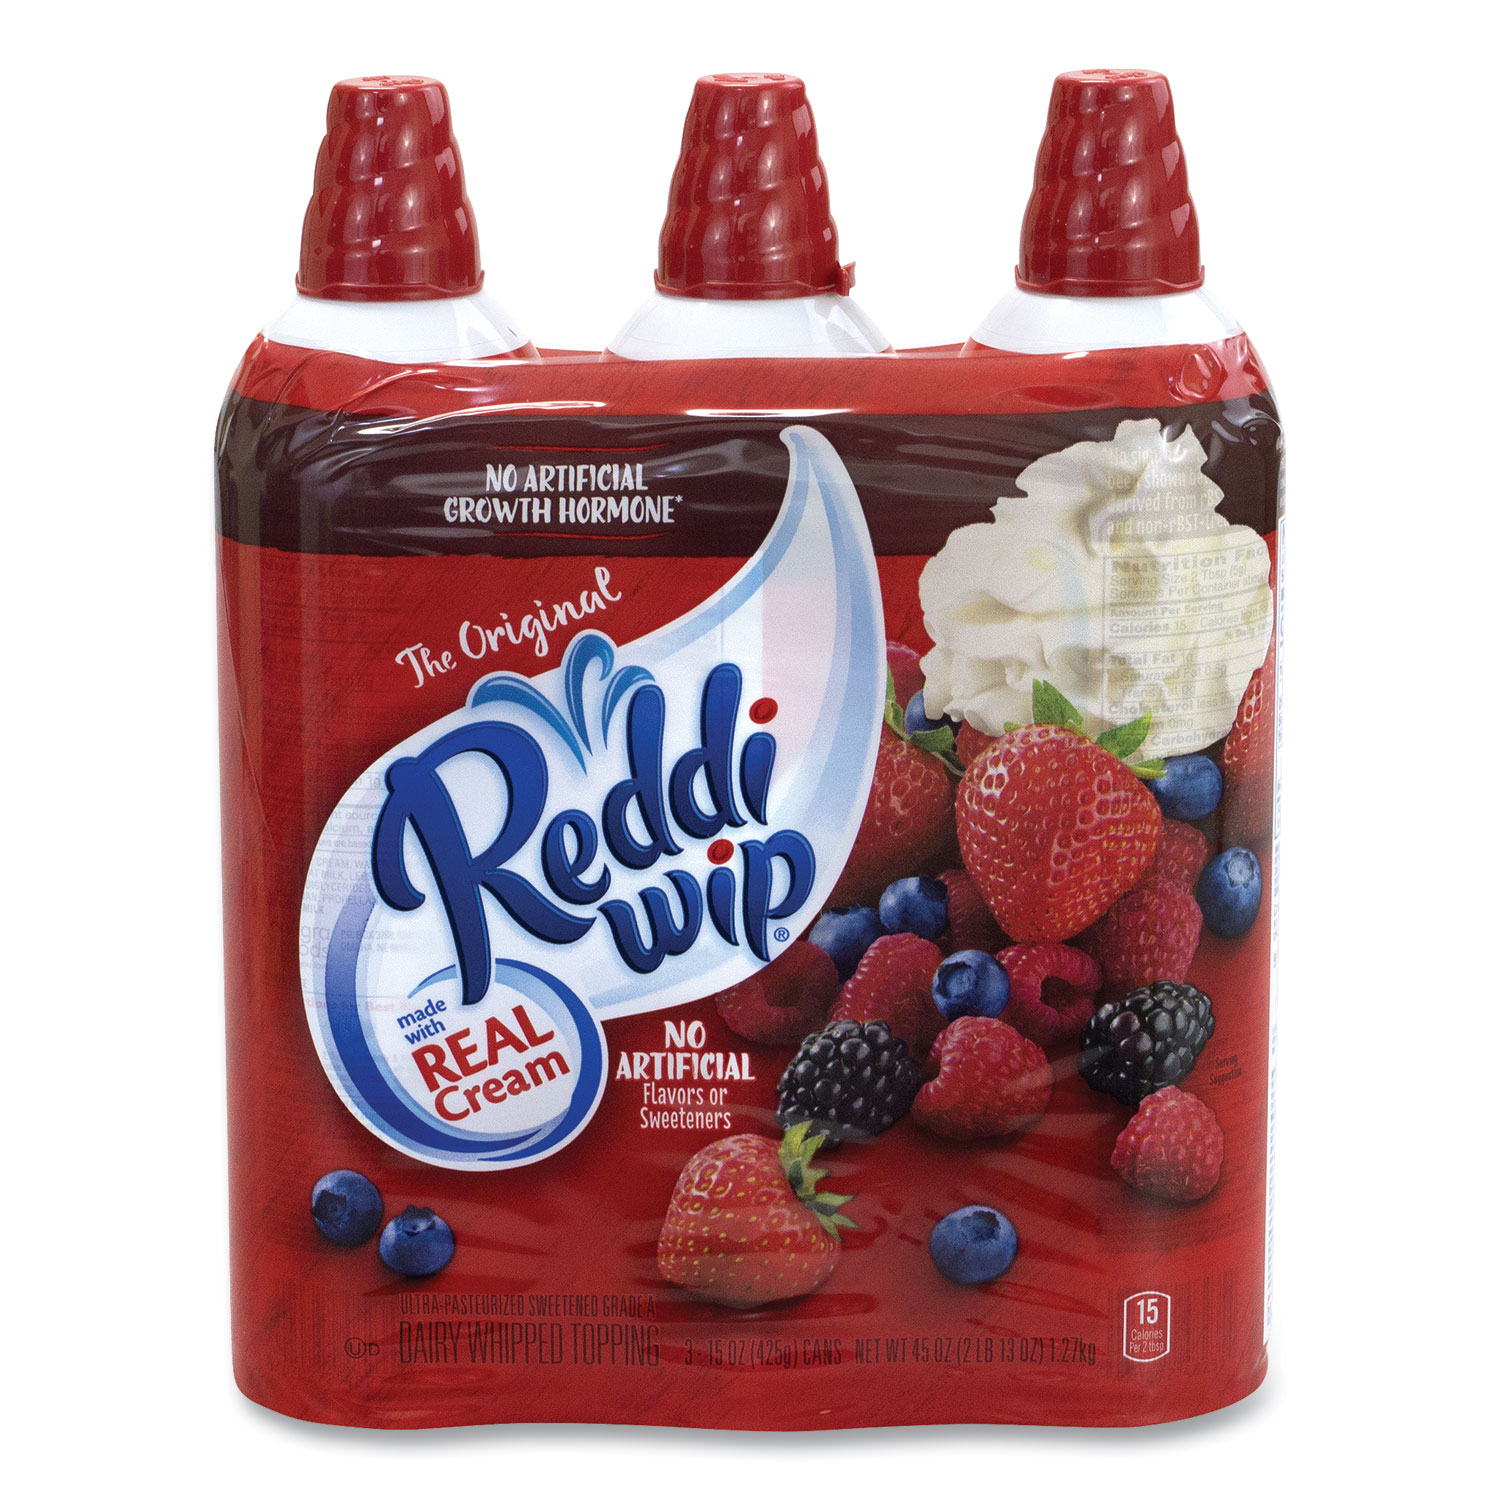  Reddi Wip 48207 Original Whipped Topping Cans, 15 oz Can, 3 Cans/Pack, Free Delivery in 1-4 Business Days (GRR90200007) 